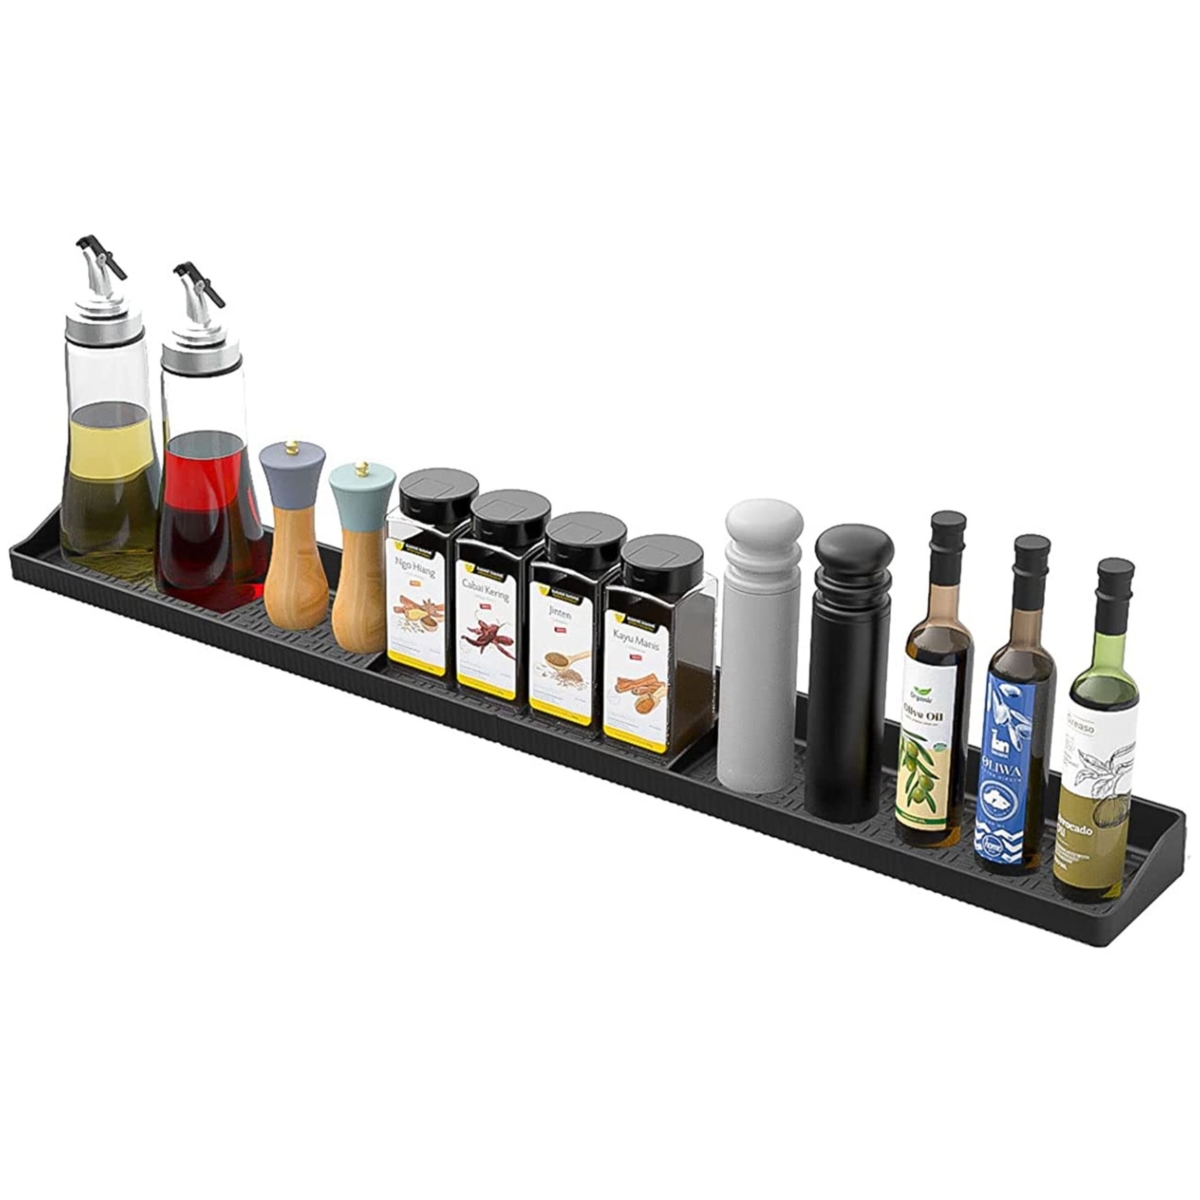 Picture of Fresh Fab Finds FFF-Black-GPCT4038 Magnetic Stove Top Shelf: Silicone Spice Rack for Kitchen Stove - Non-Slip Oven Organizer.